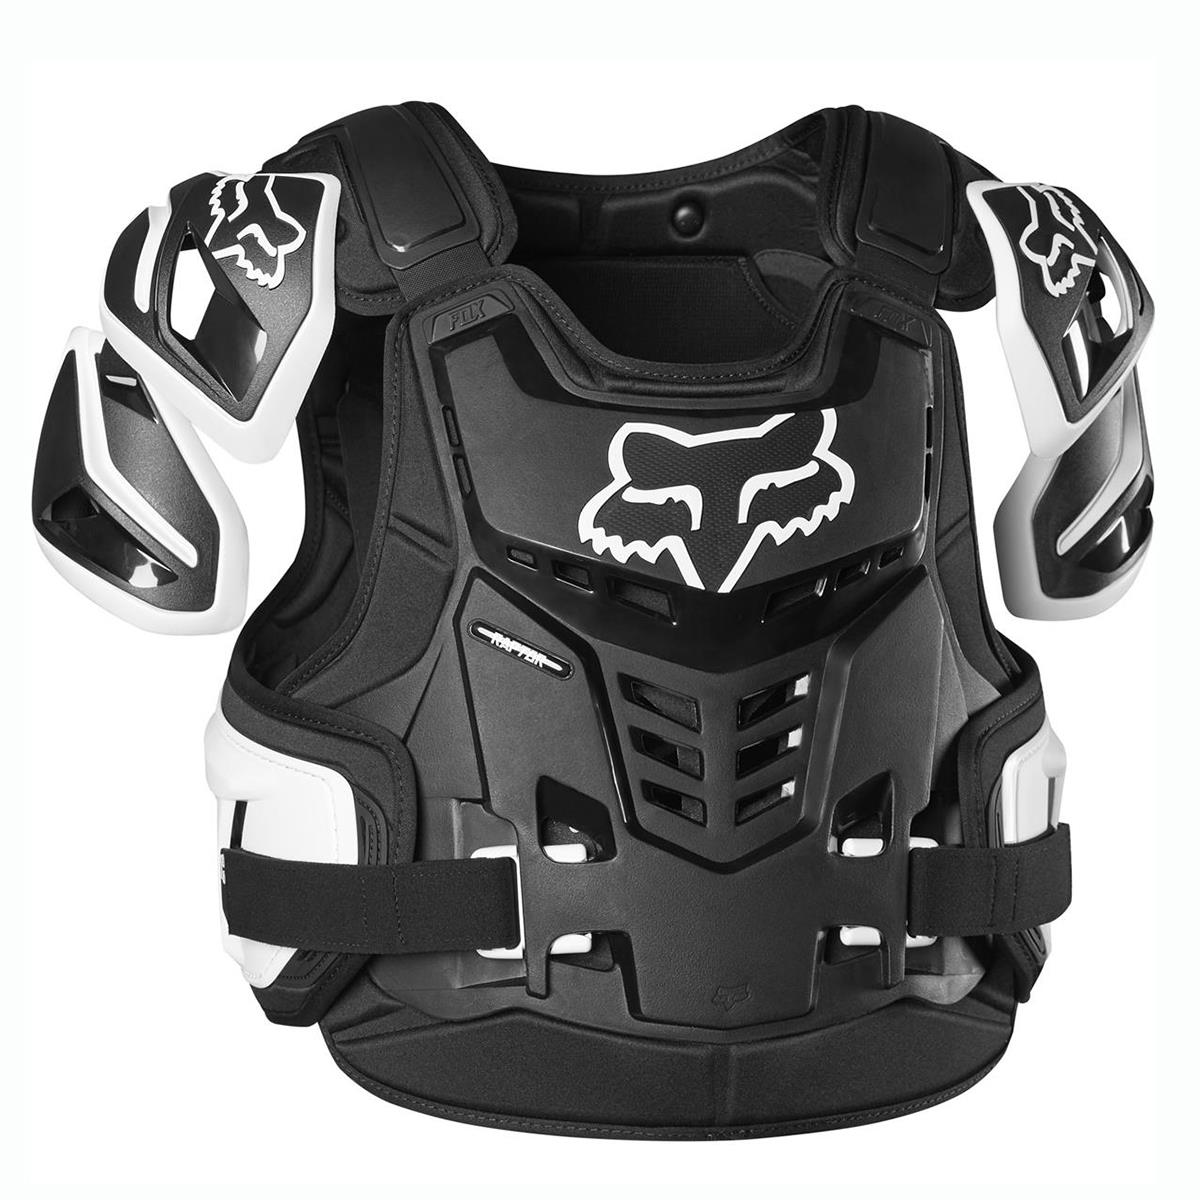 Chest Protectors For Dirt Bikes | lupon.gov.ph